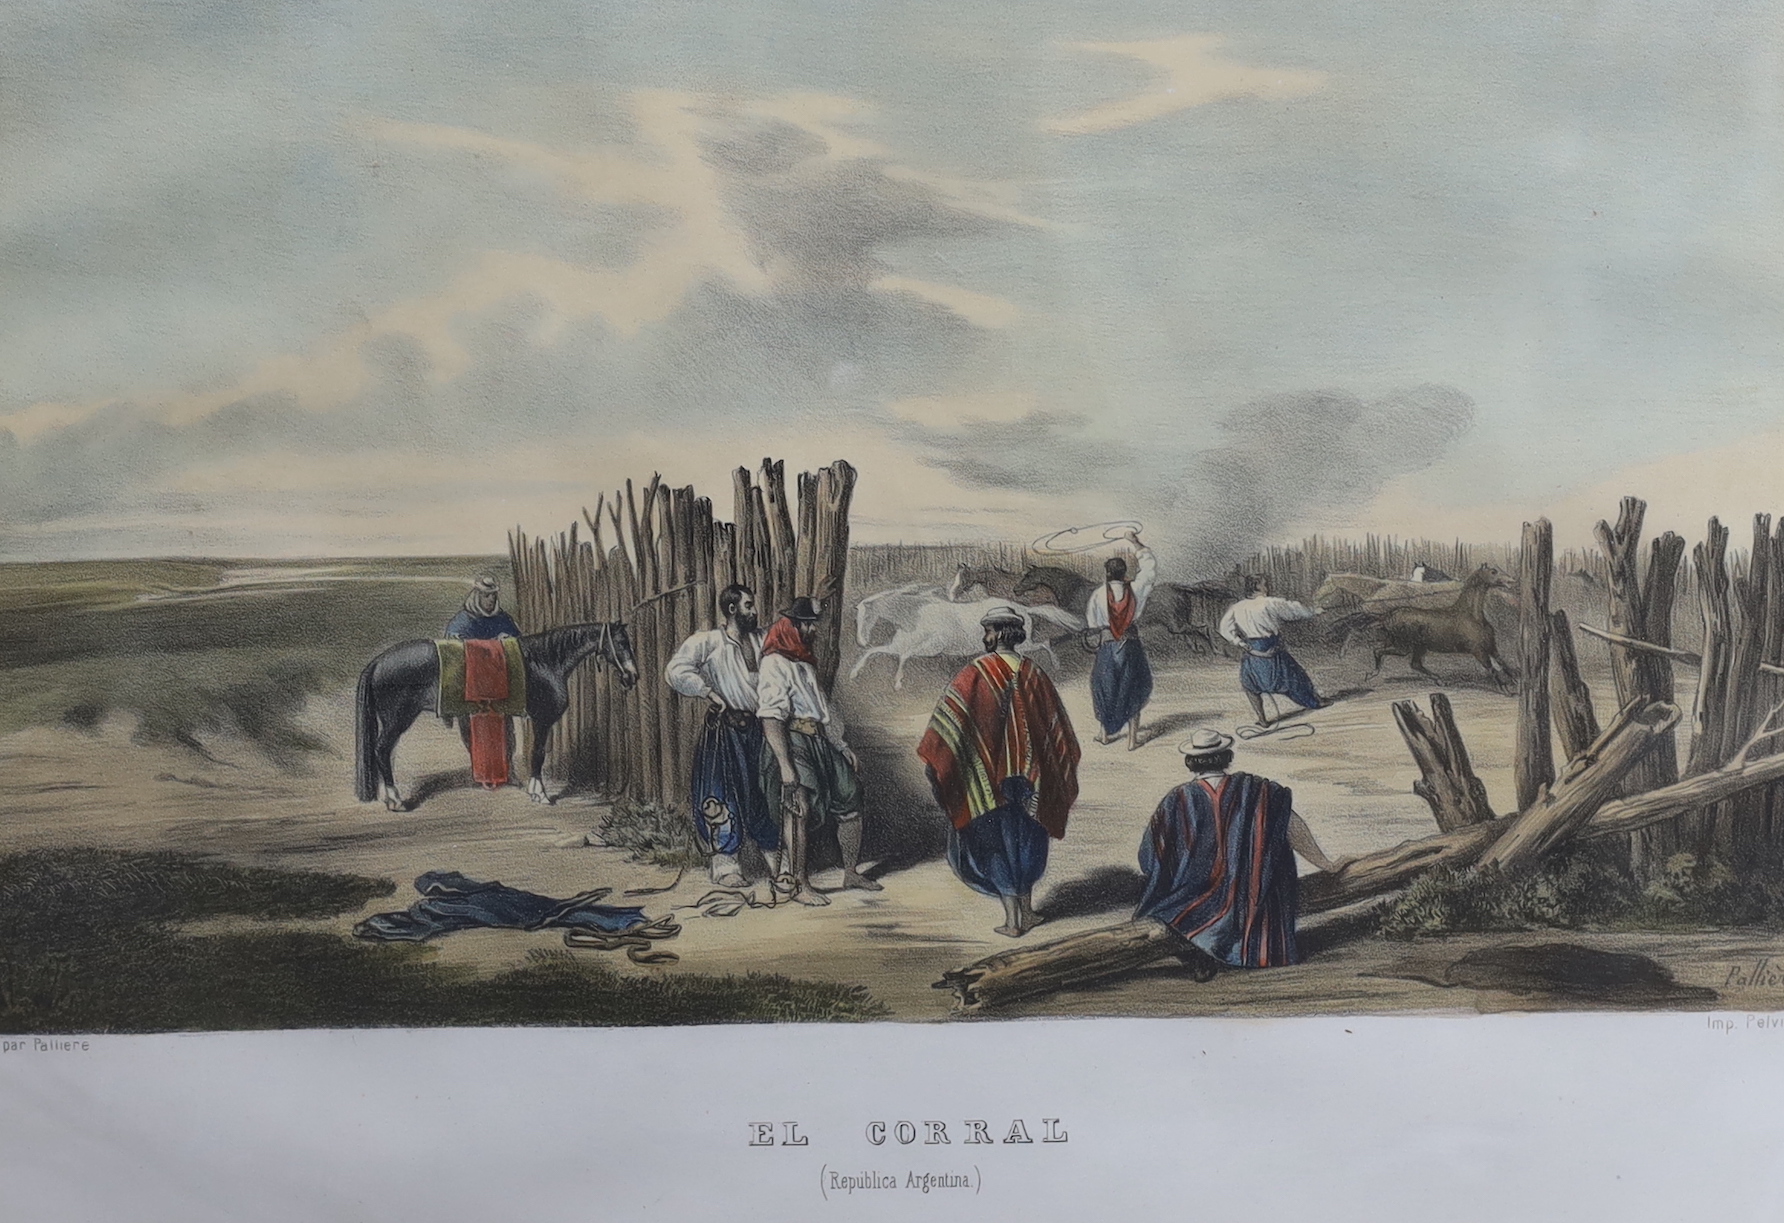 Pelvilain after Palliere, pair of coloured lithographs, 'El Asado' and 'El Corral' (Argentina) and two coloured engraved views of St Petersburg after Arnout, largest overall 29 x 34cm (4)